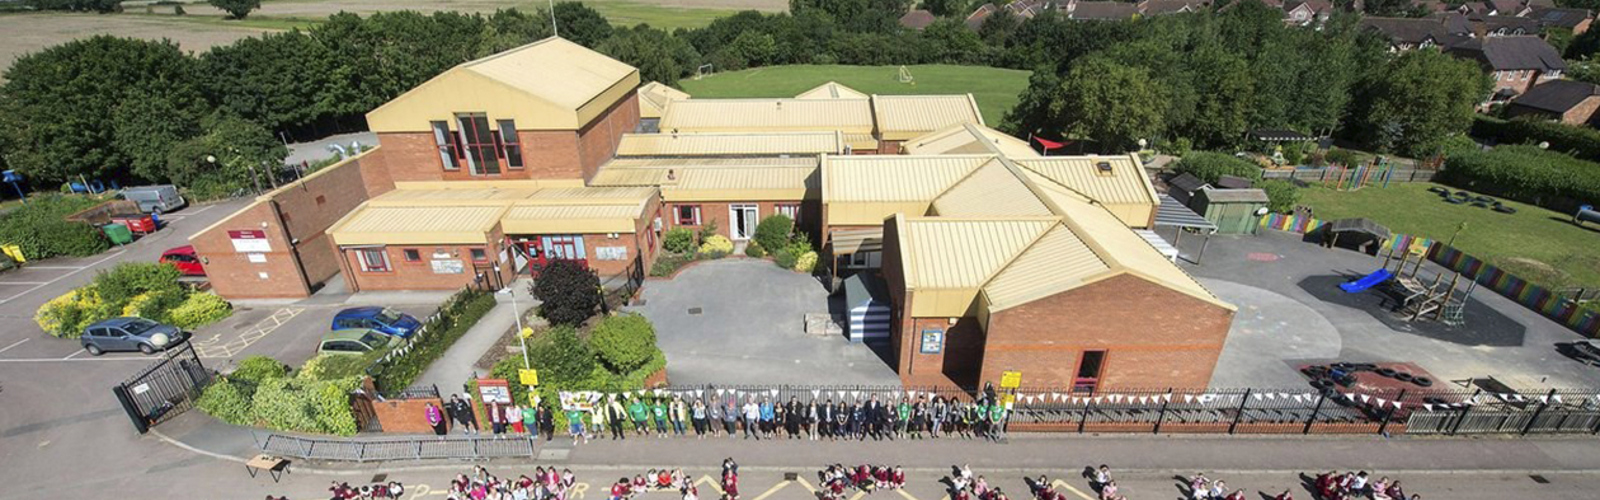 Aerial shot of schoolchildren standing together to form the words 'We love clean air'